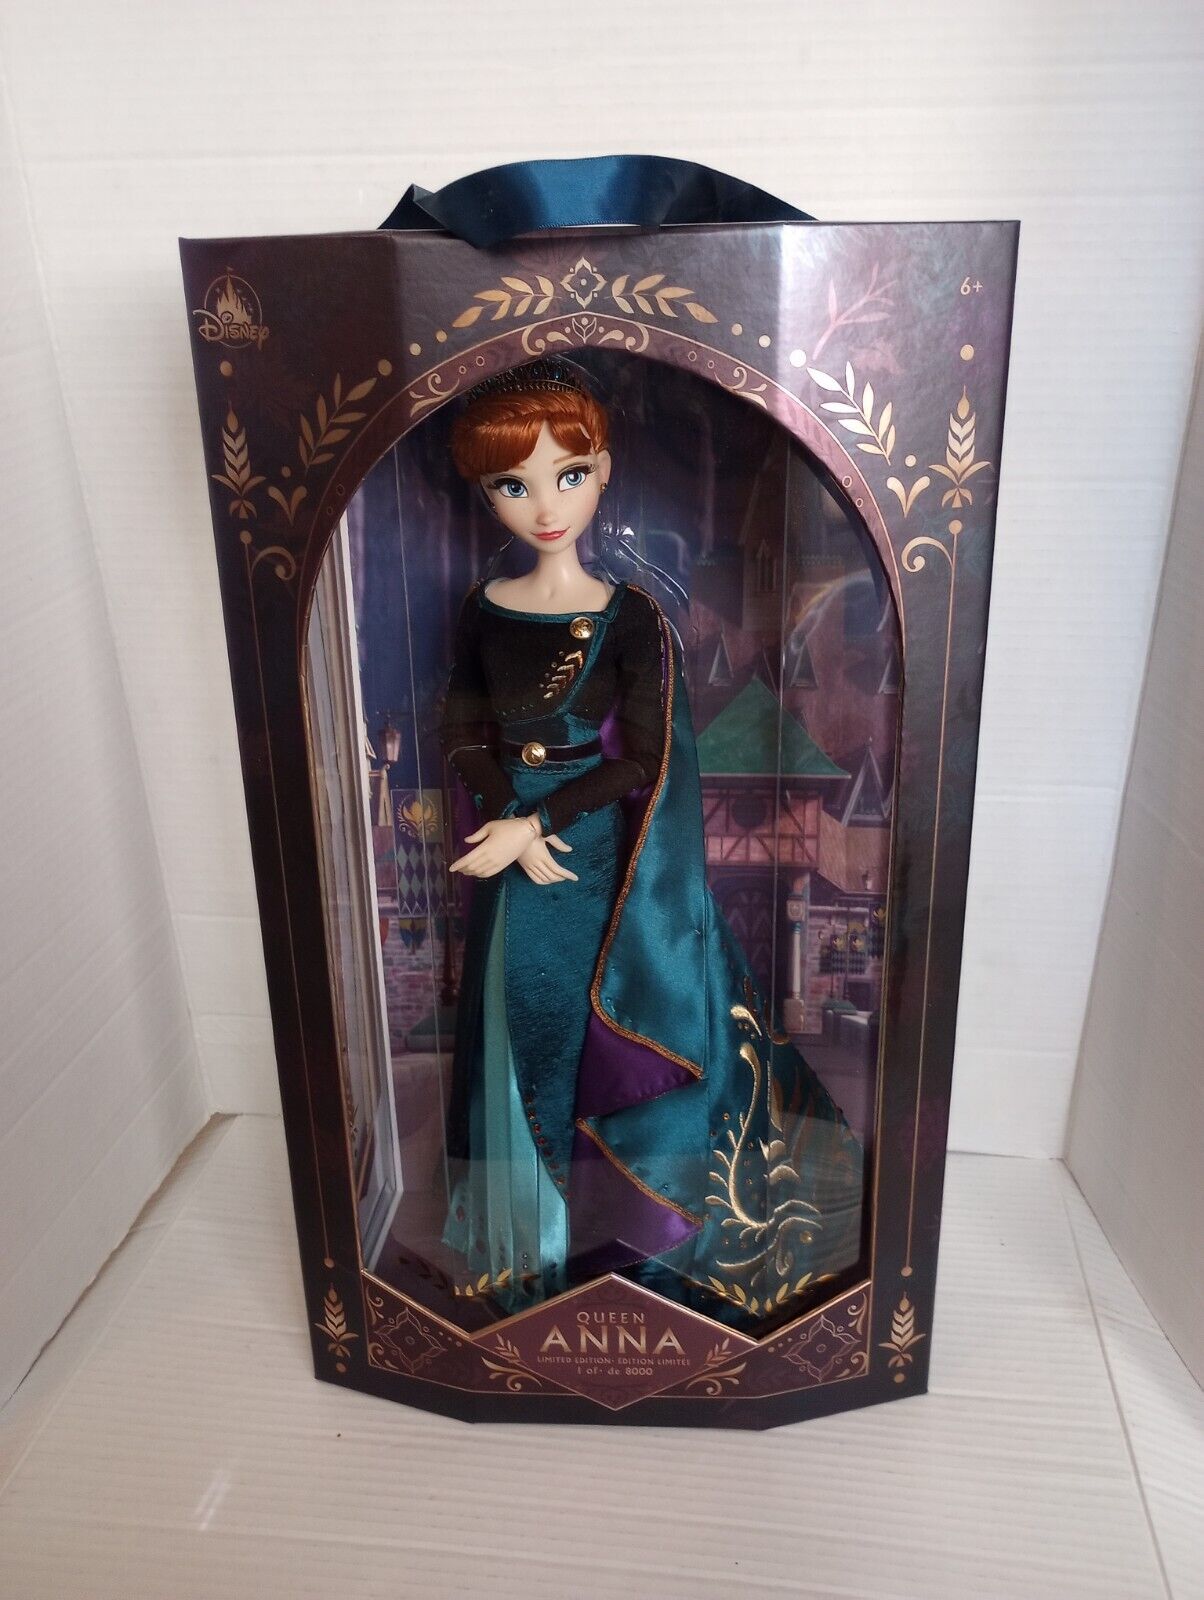 Disney Store Queen Anna Doll Frozen 2 Limited Edition 1 Of 8000 17” Elsa Sister 